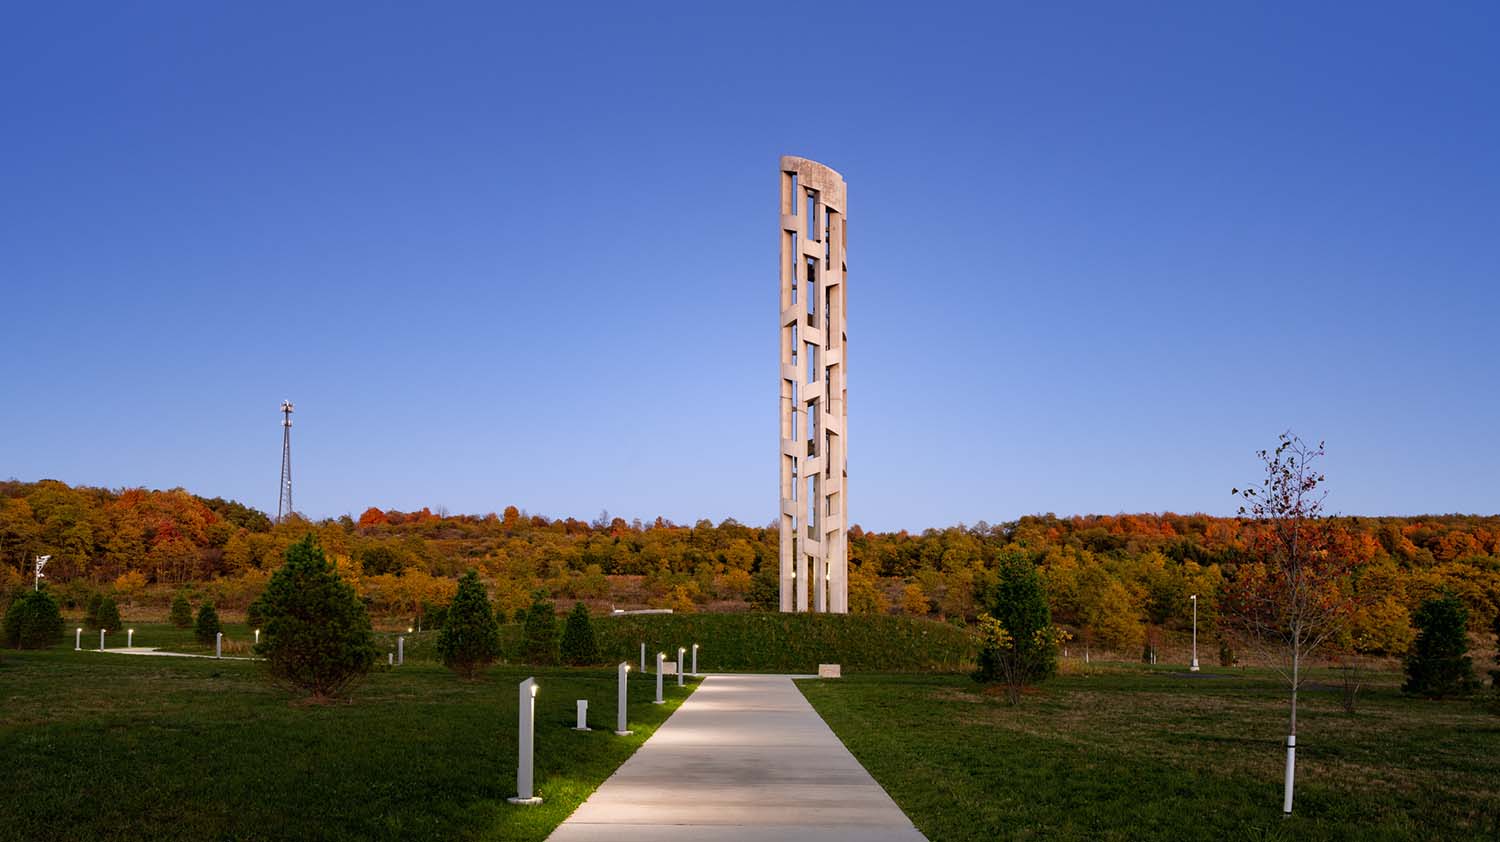 9/11's “Tower of Voices”, remembering the 40 heroes 20 years later